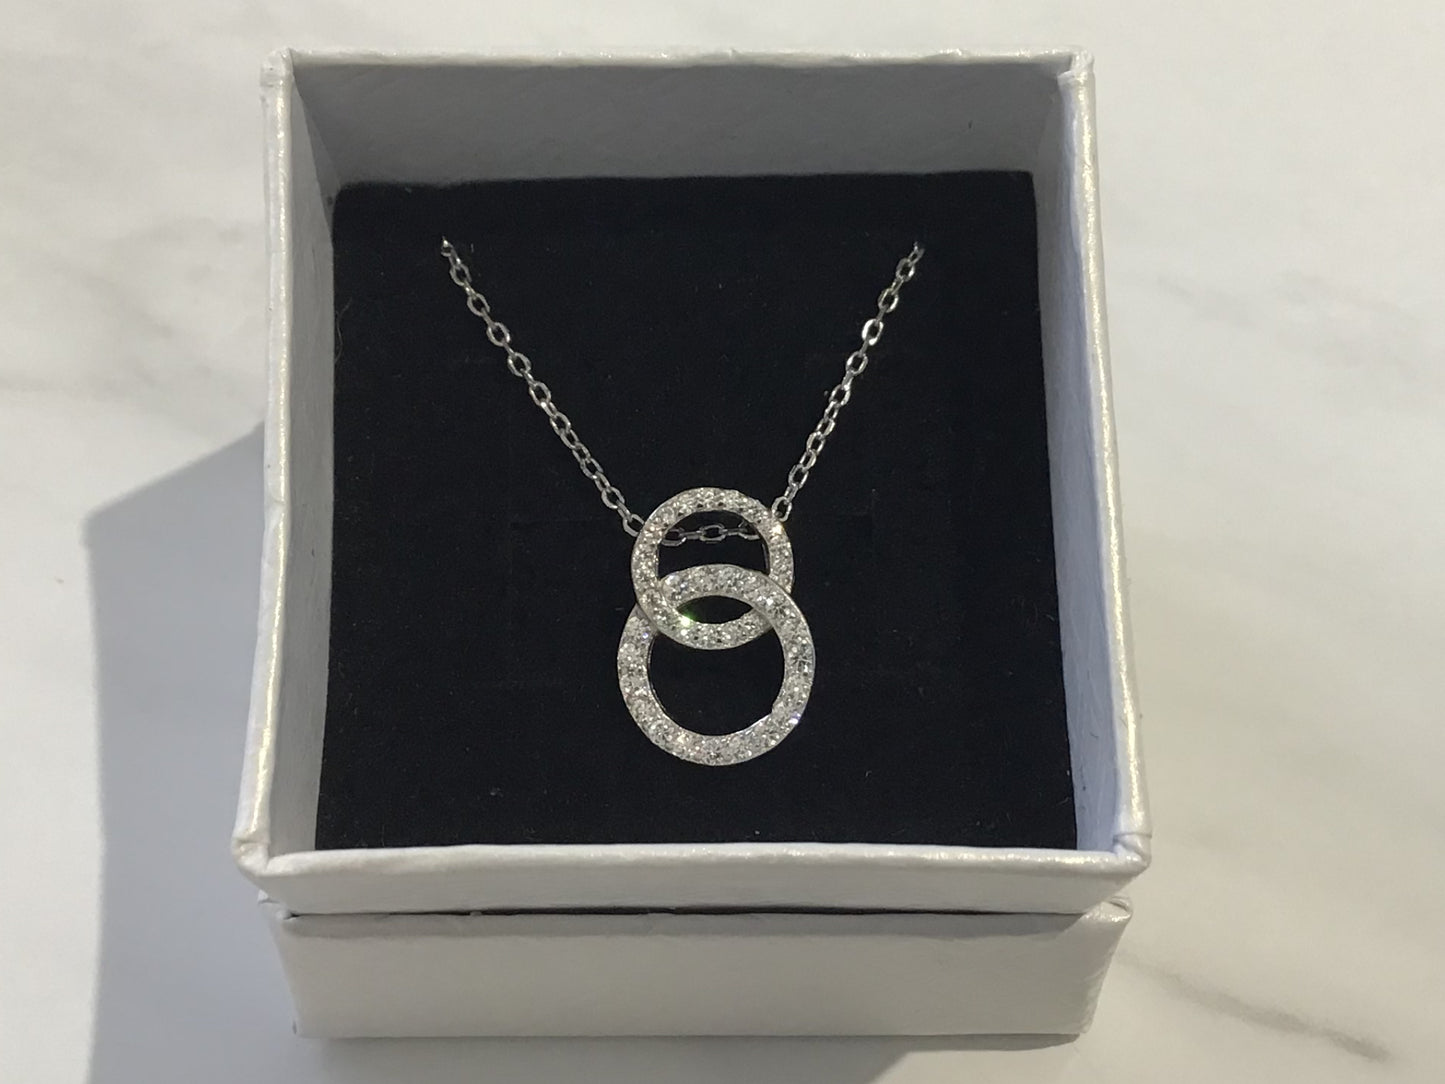 Genuine 925 Sterling Silver Cubic Zirconia Double Ring Pendant with Chain